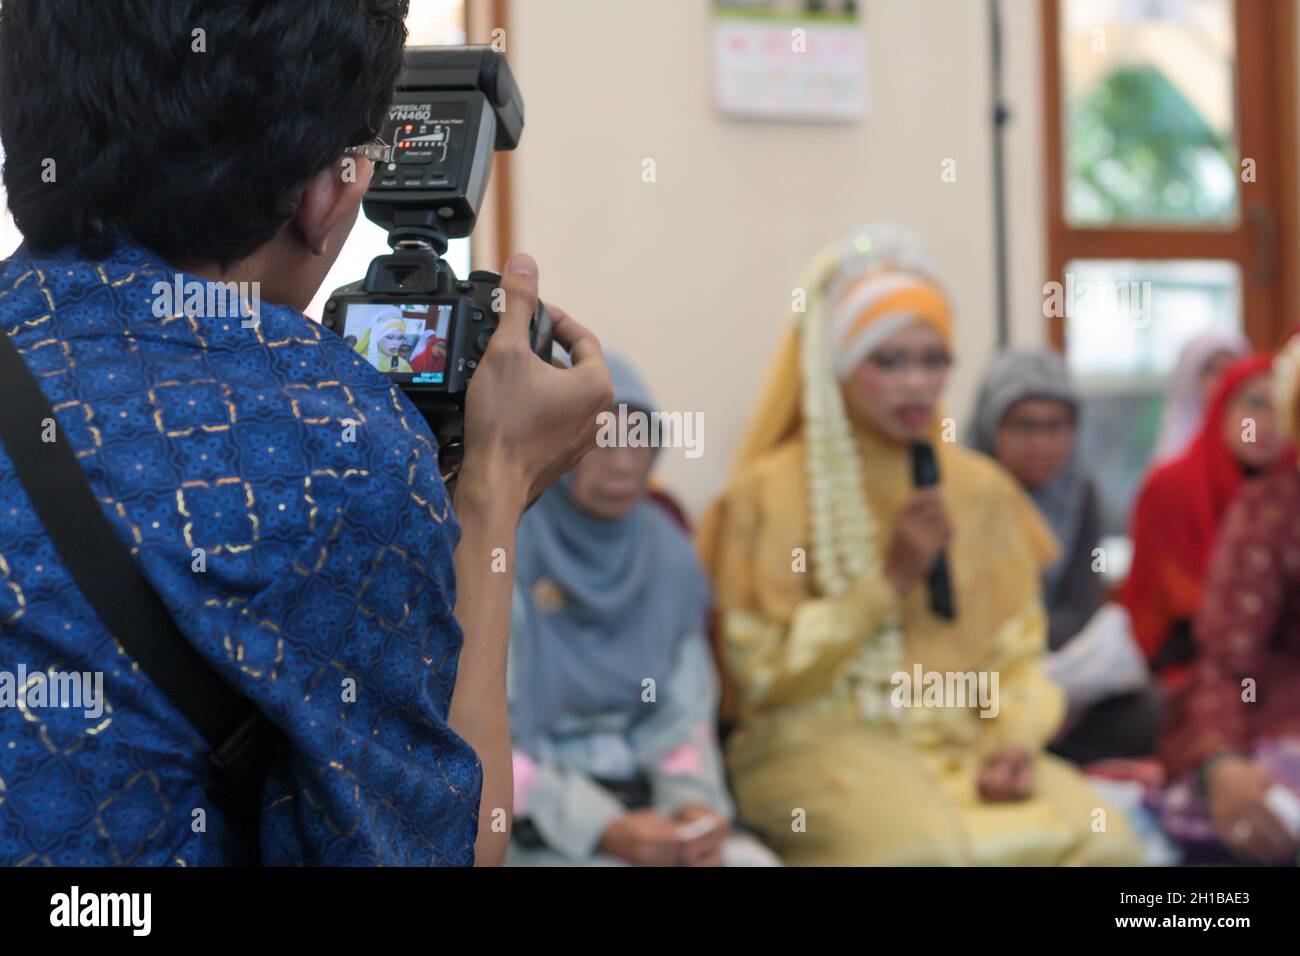 View of professional wedding photographer looking through viewfinder of digital camera composing before taking pictures in ceremony. Stock Photo